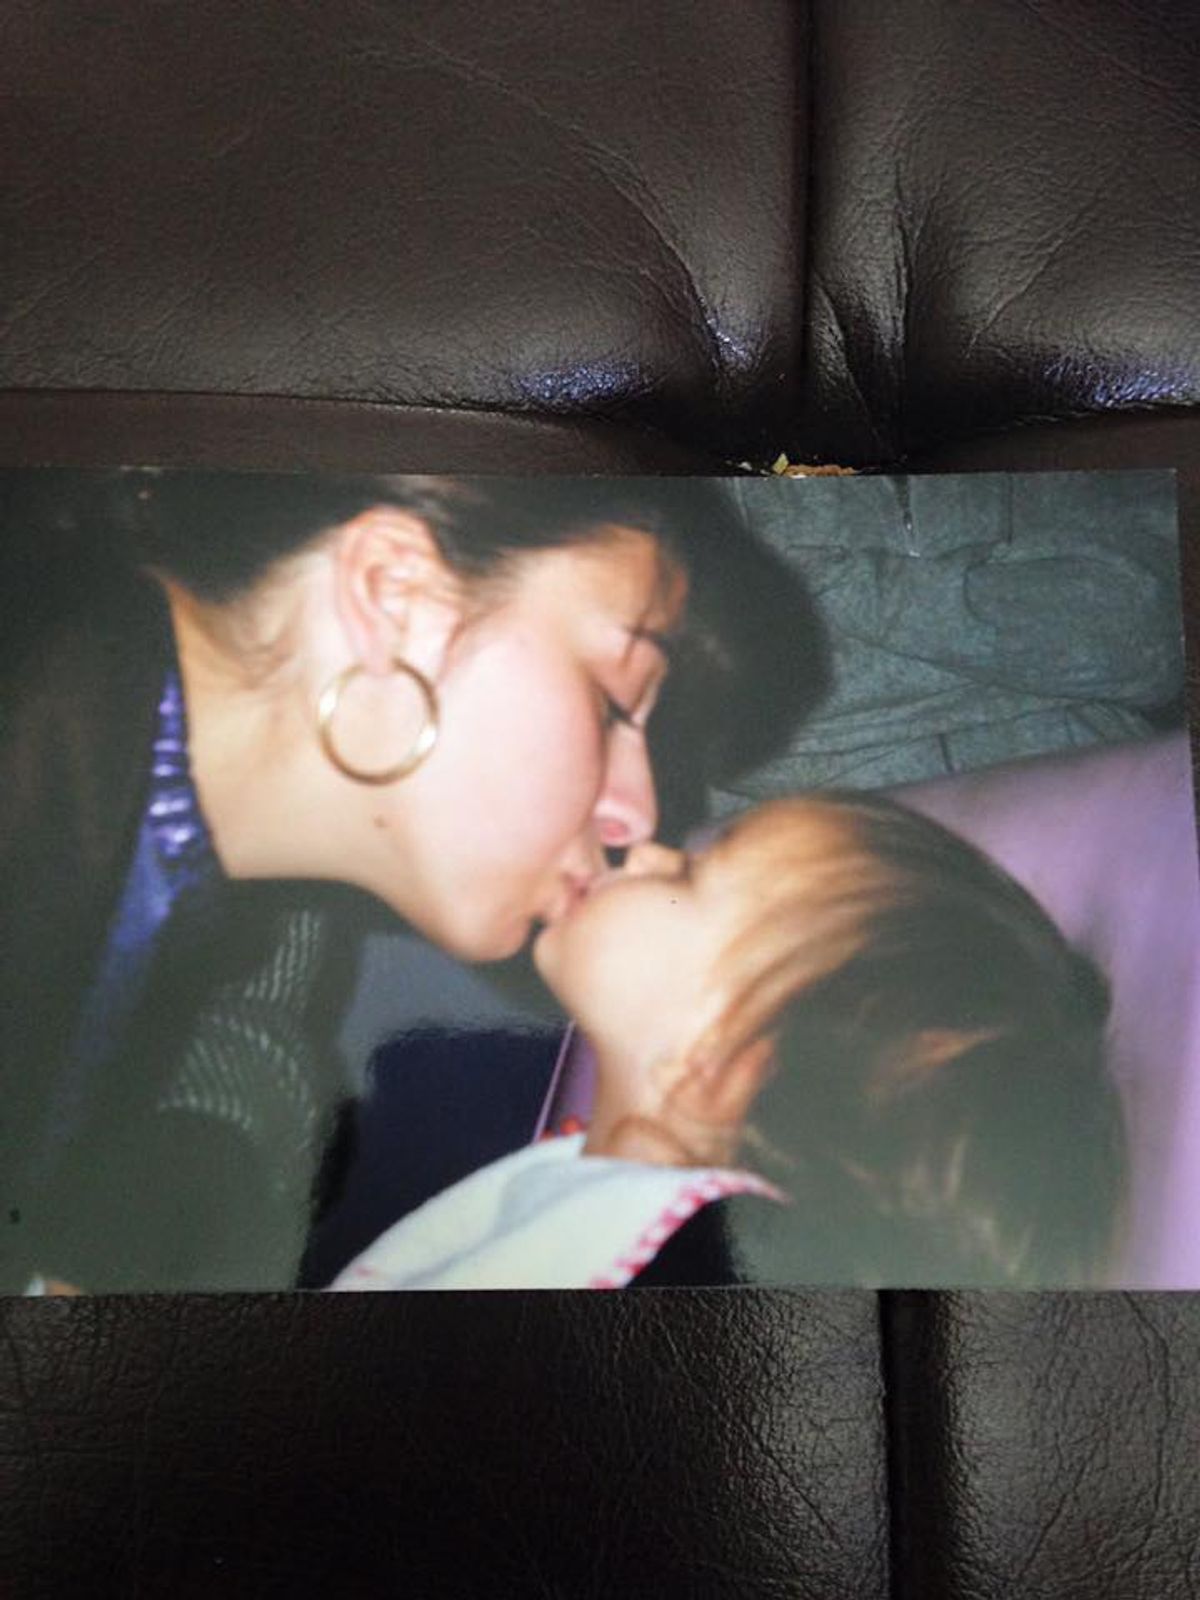 From Daughter To Mother: An Open Letter As I Exit My Years Of Adolescence